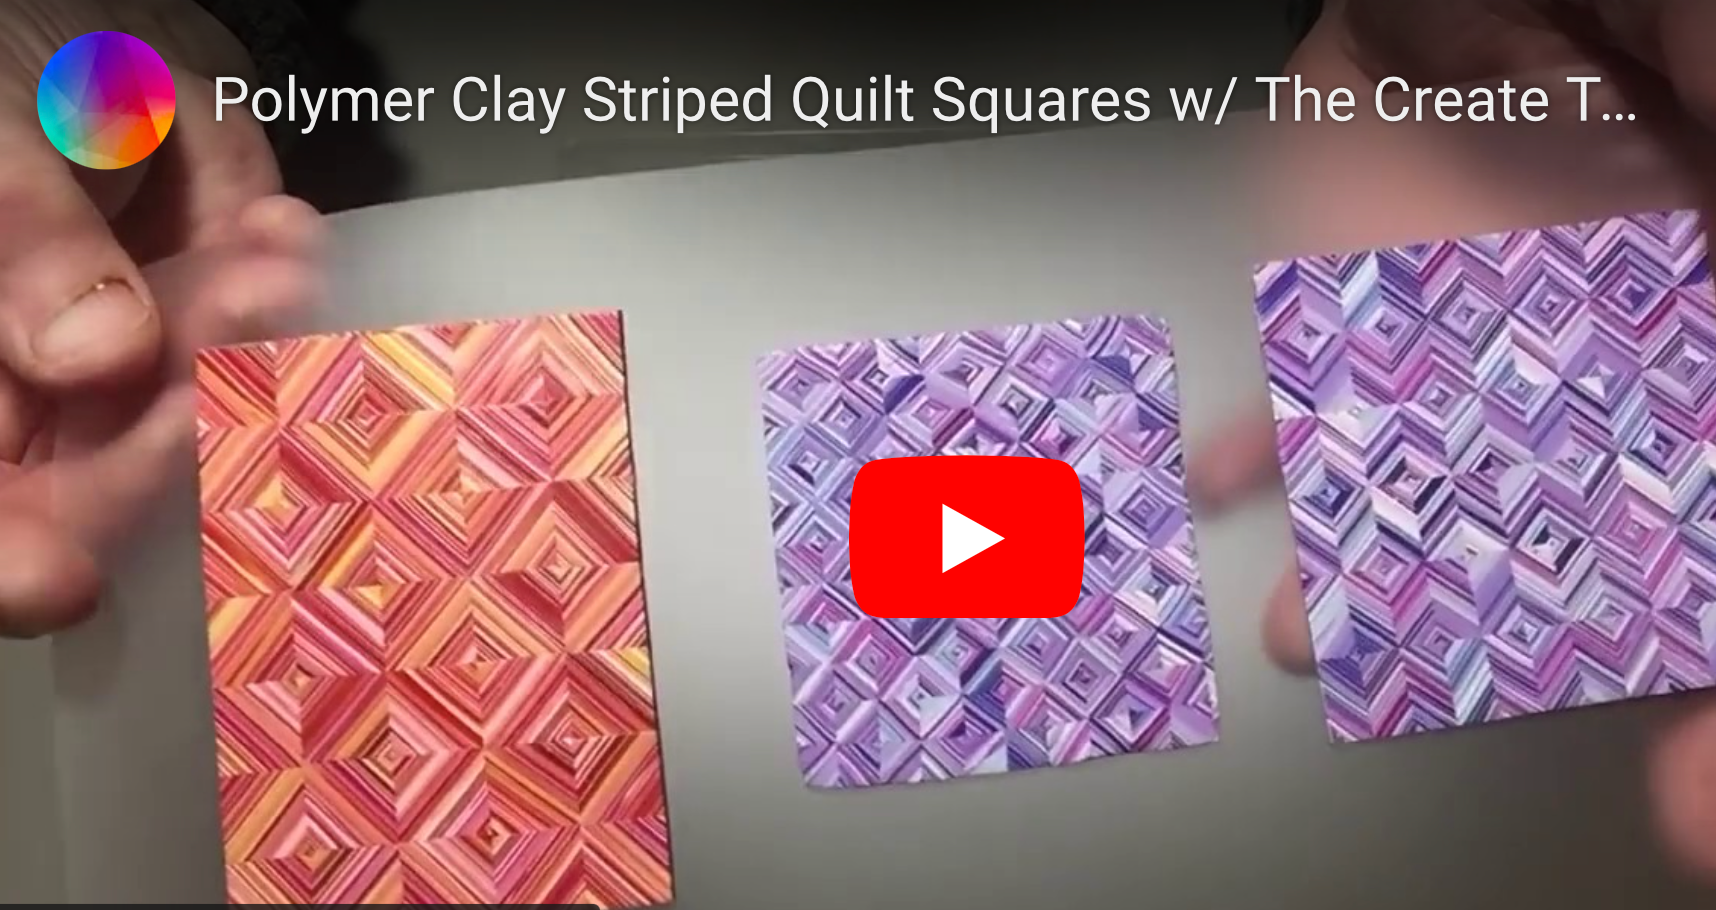 Load video: Polymer Clay Striped Quilt Squares w/ The Create Template